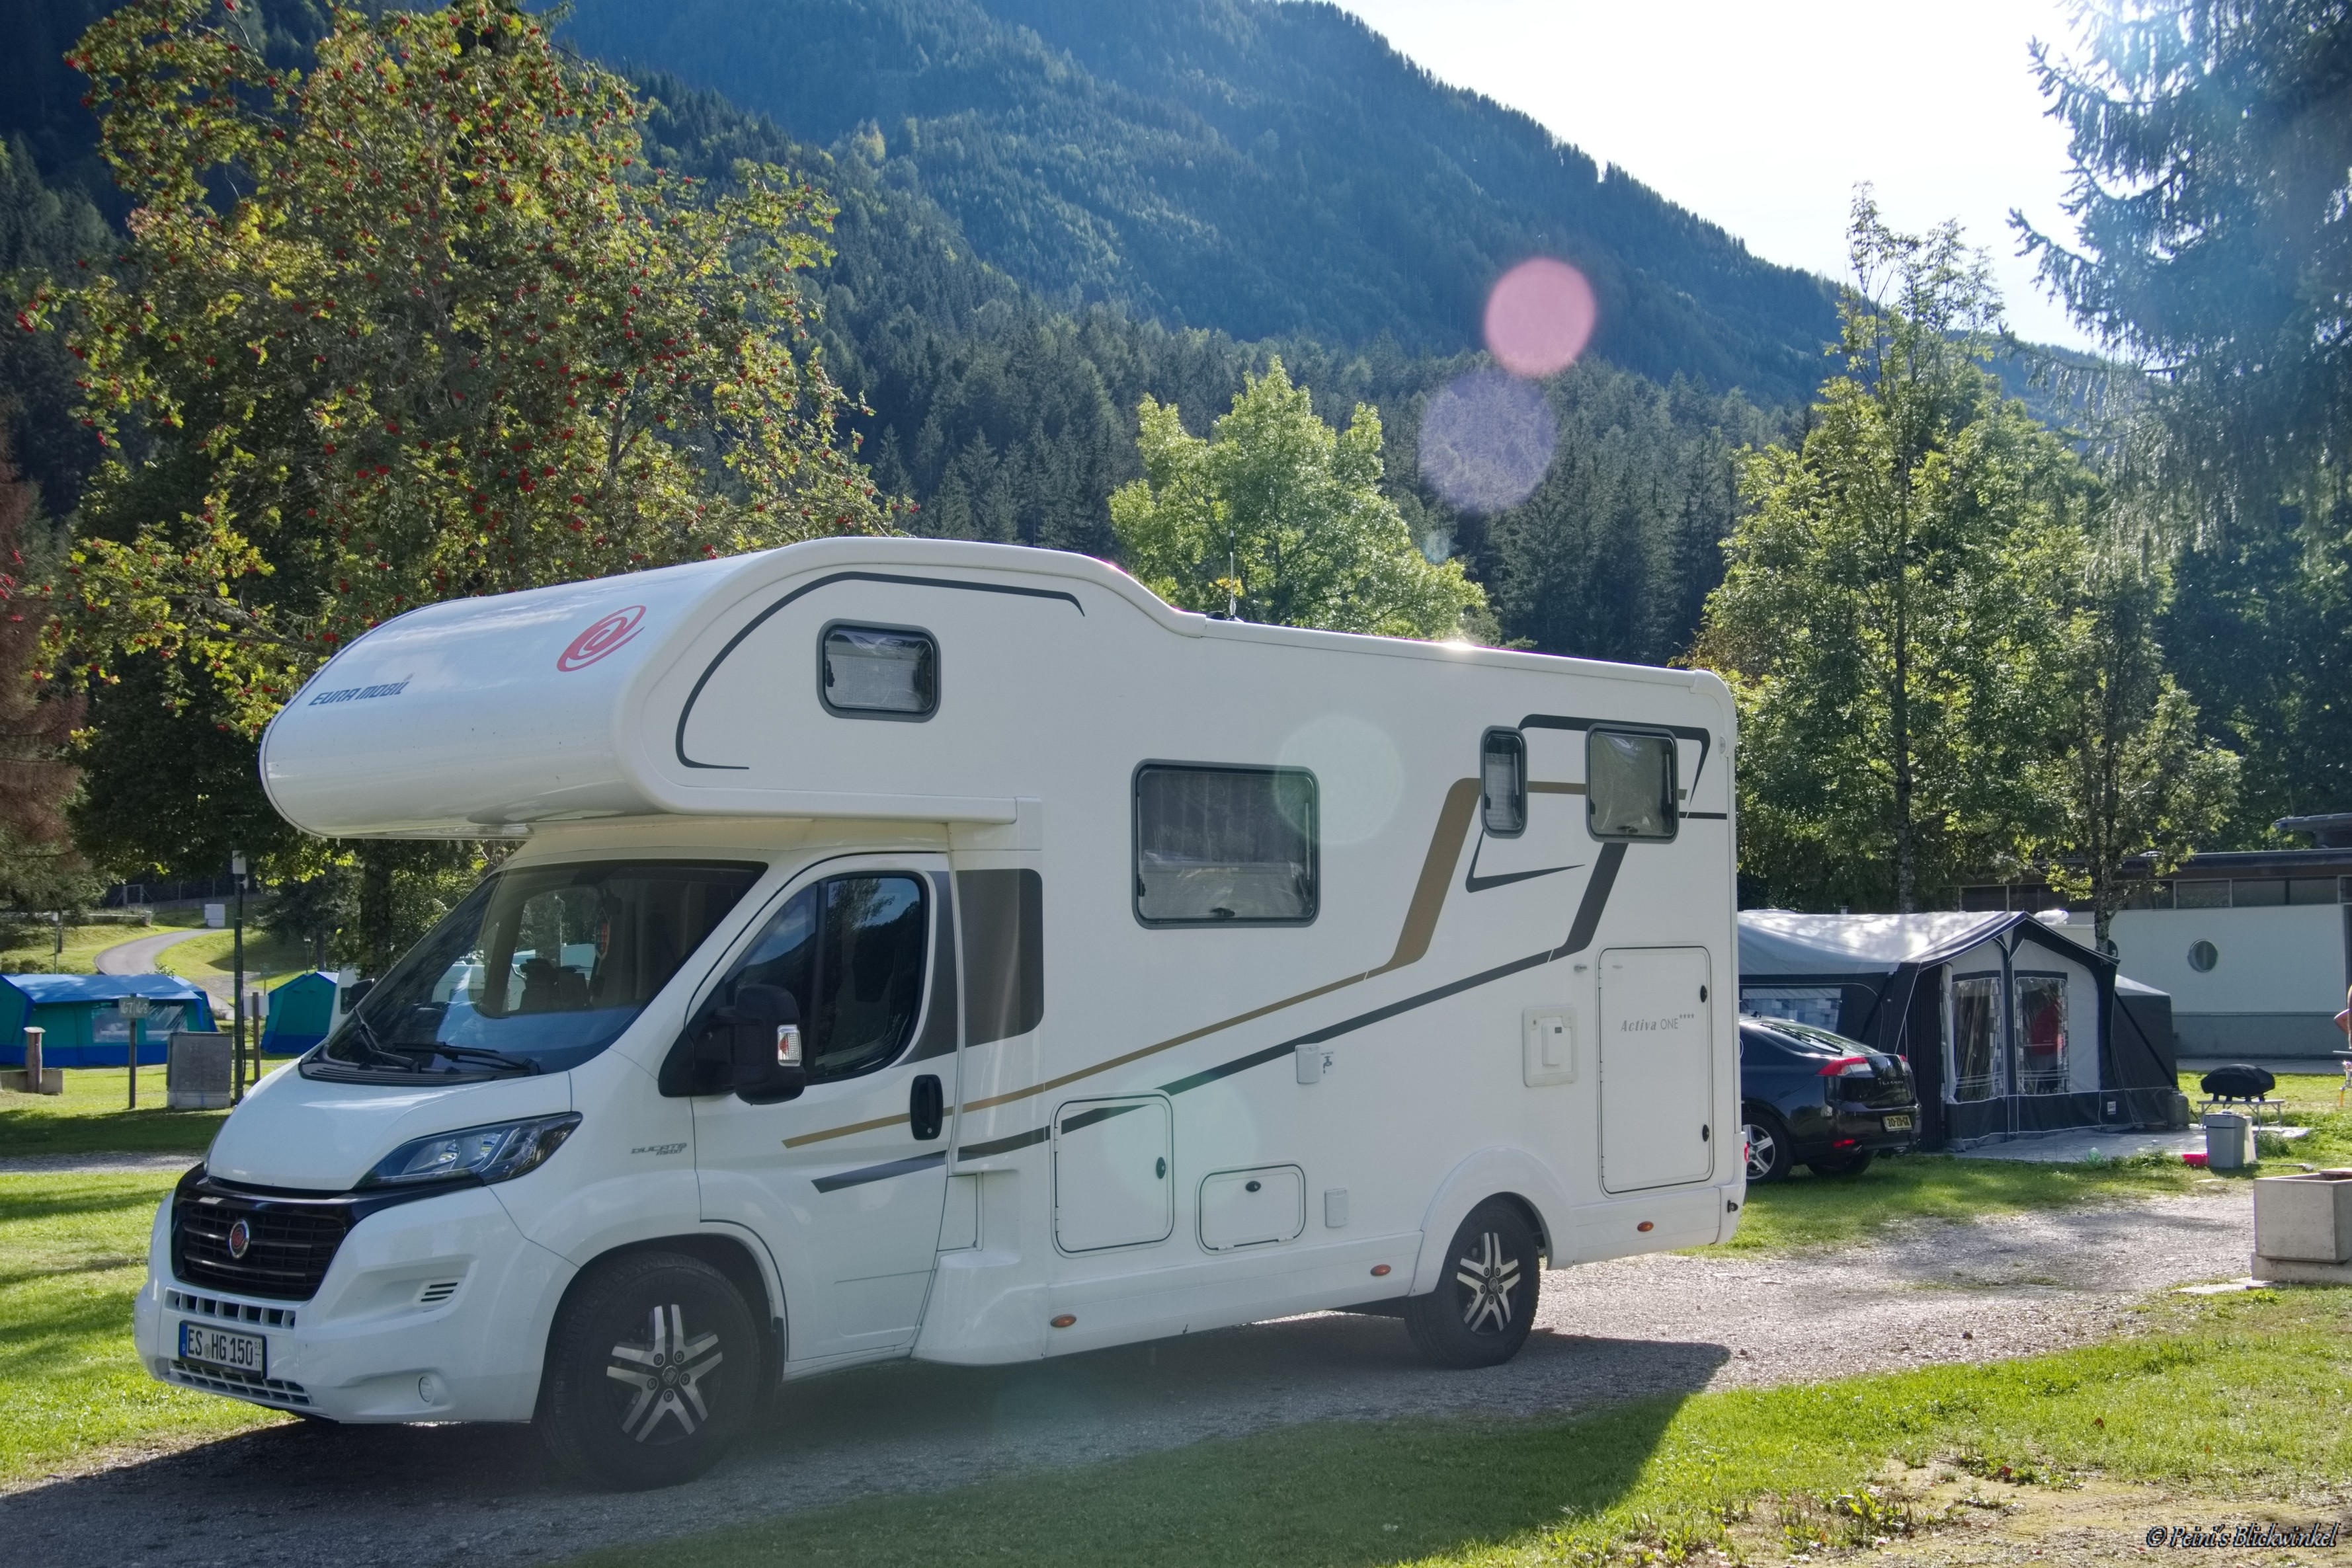 Emplacement - Emplacement Confort "C" - Camping Waldbad, Dellach im Drautal